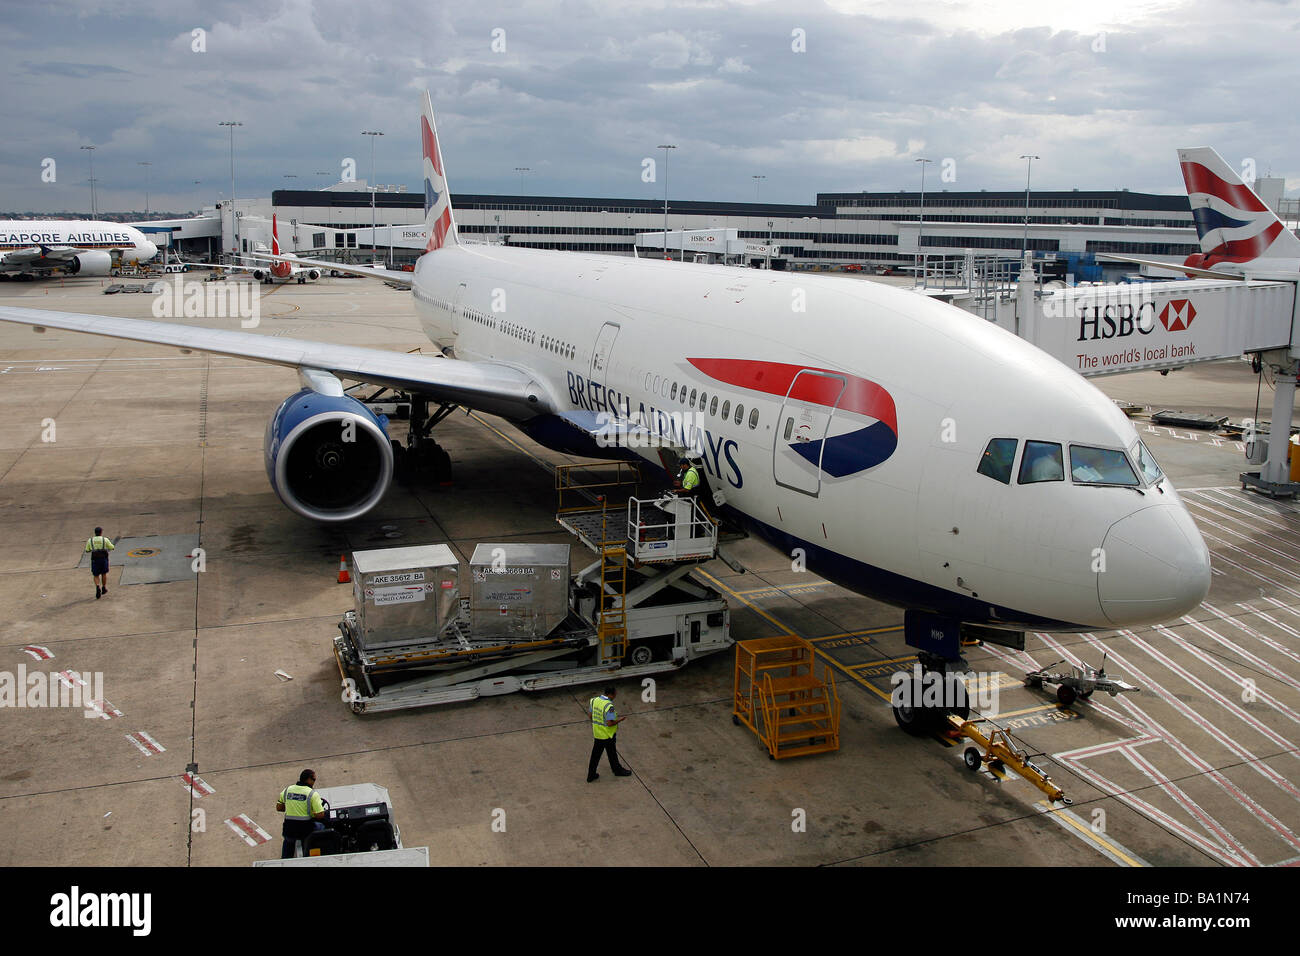 A British Airways Boeing 777-200 aircraft sits on the tarmac at Sydney Kingsford Smith International Airport Stock Photo